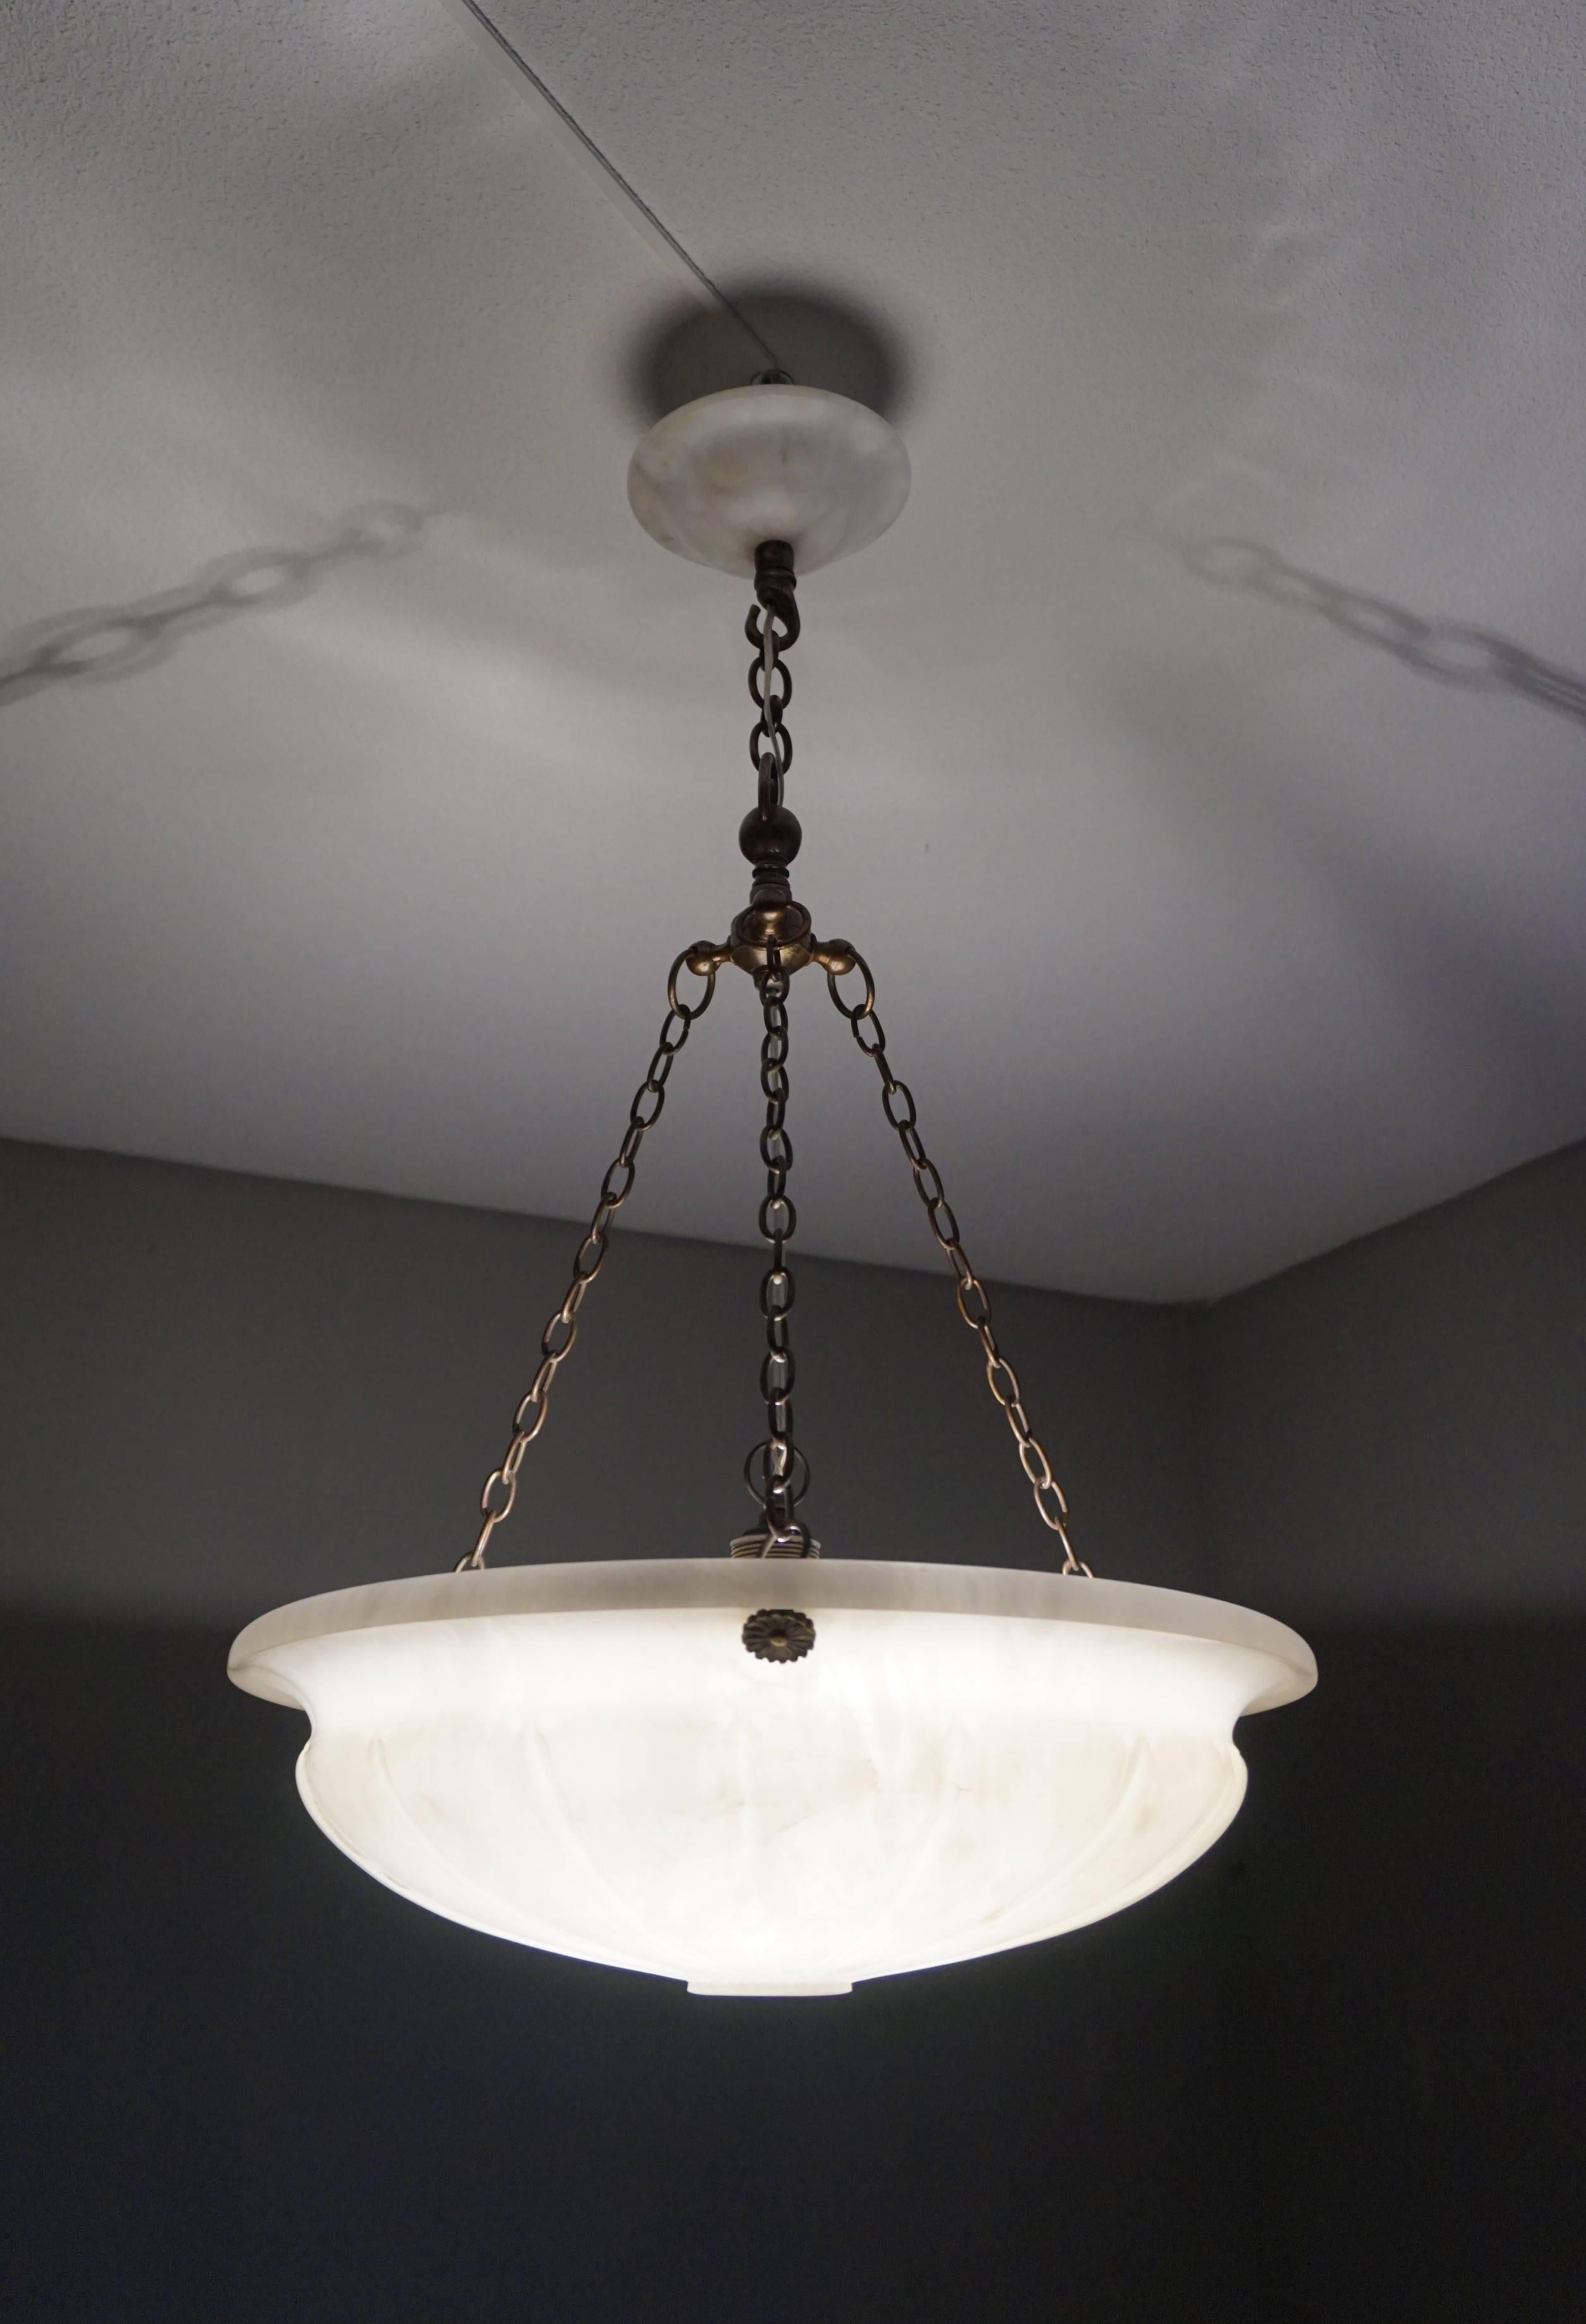 Amazing quality, excellent condition and perfectly balanced chandelier.

If you are looking for a stylish European, antique light fixture to grace your living space then this classical French beauty could be perfect for you. We have never seen an